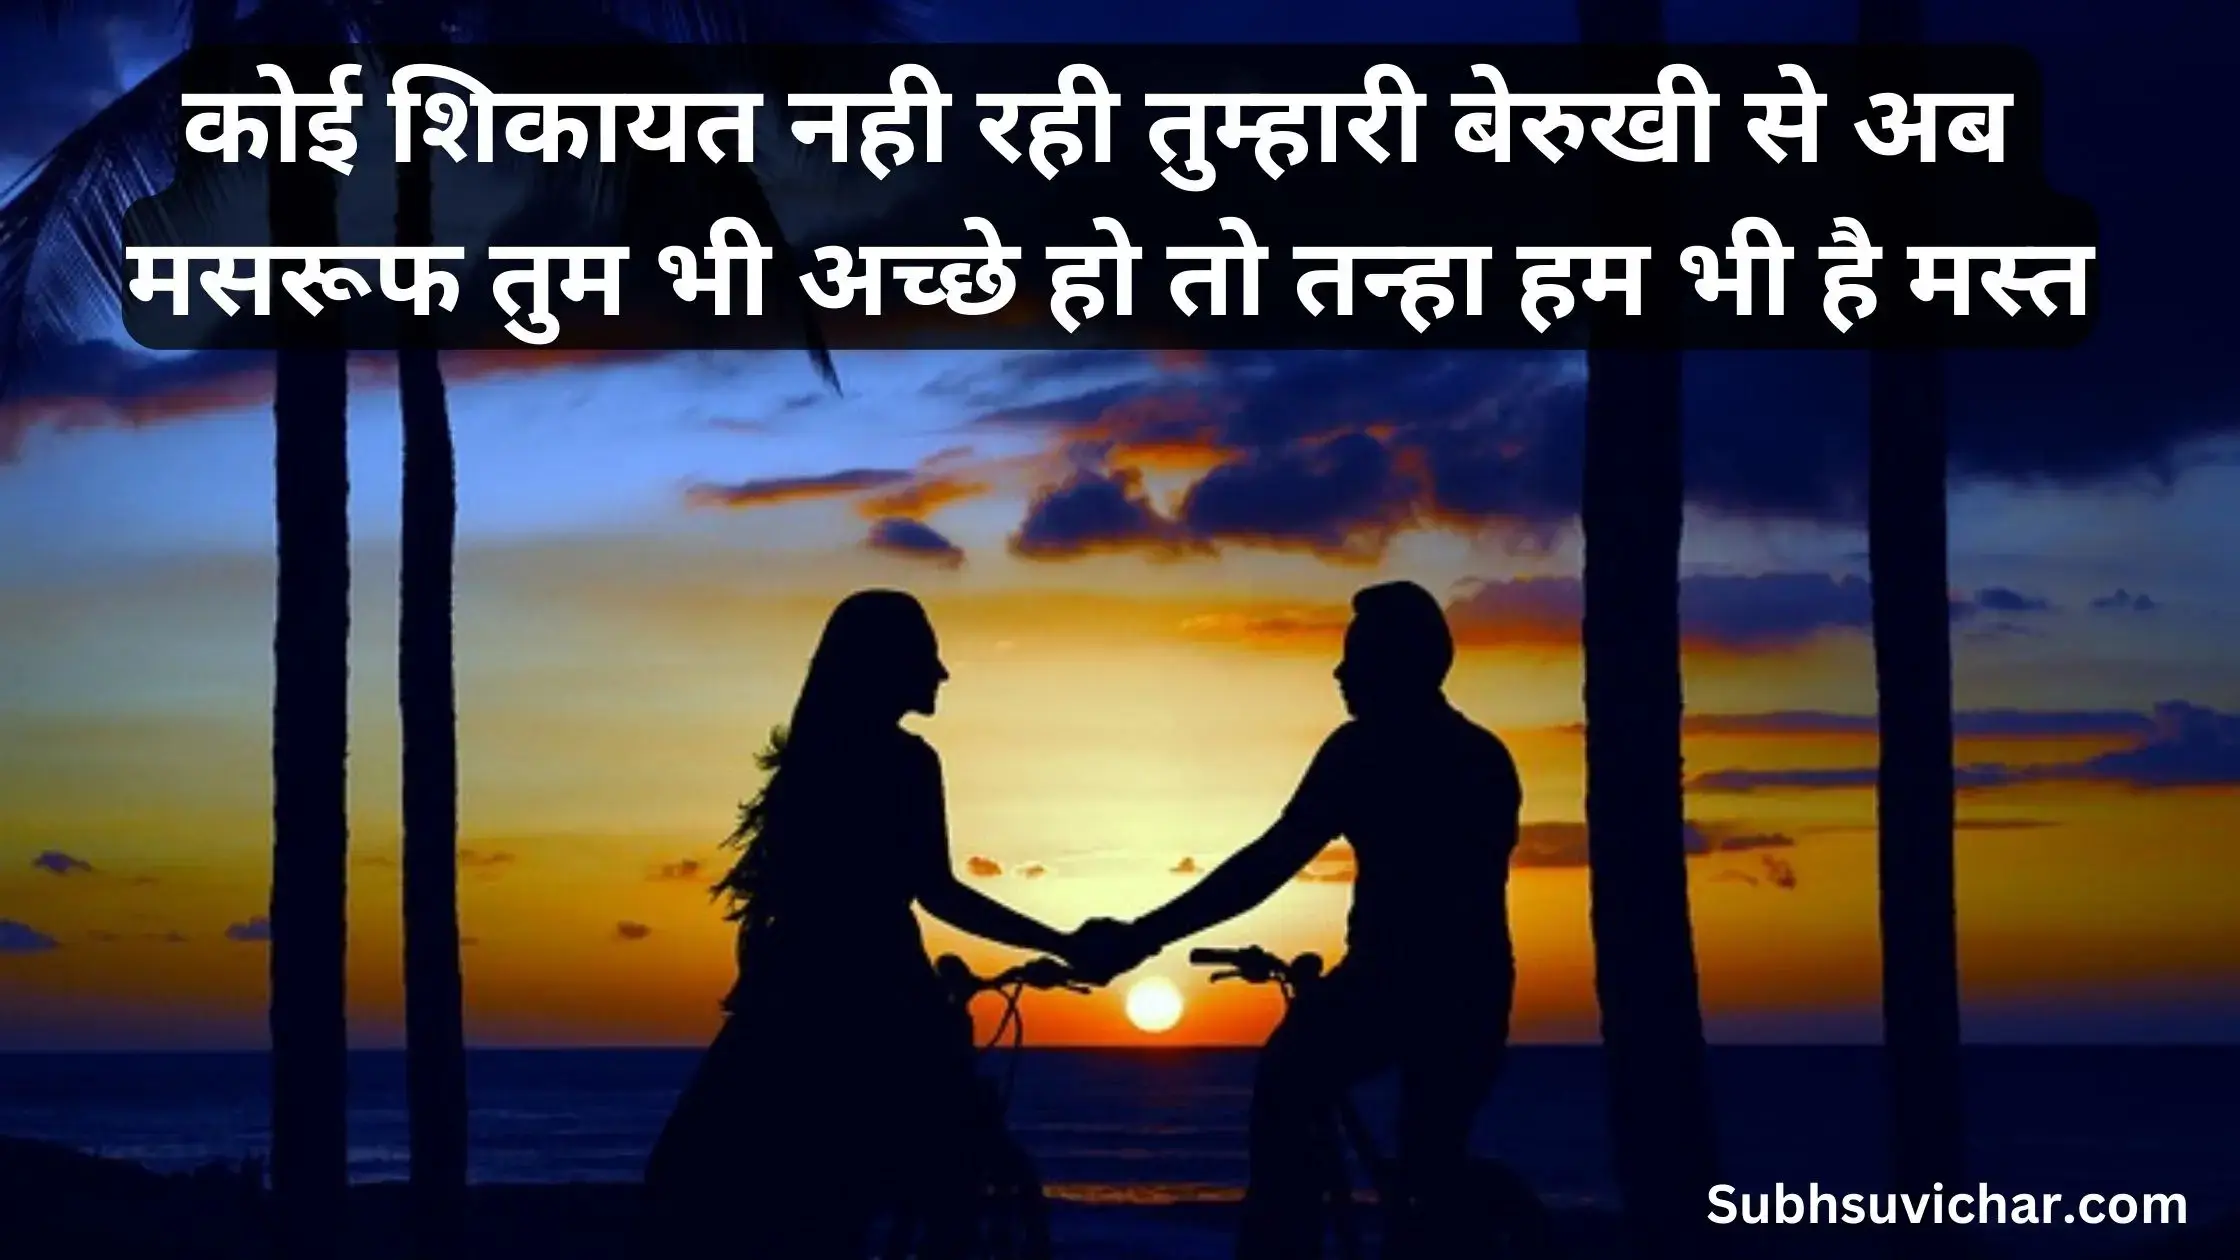 This post contains emotional heart touching shayari in hindi font with images for your whatsapp and facebook status.